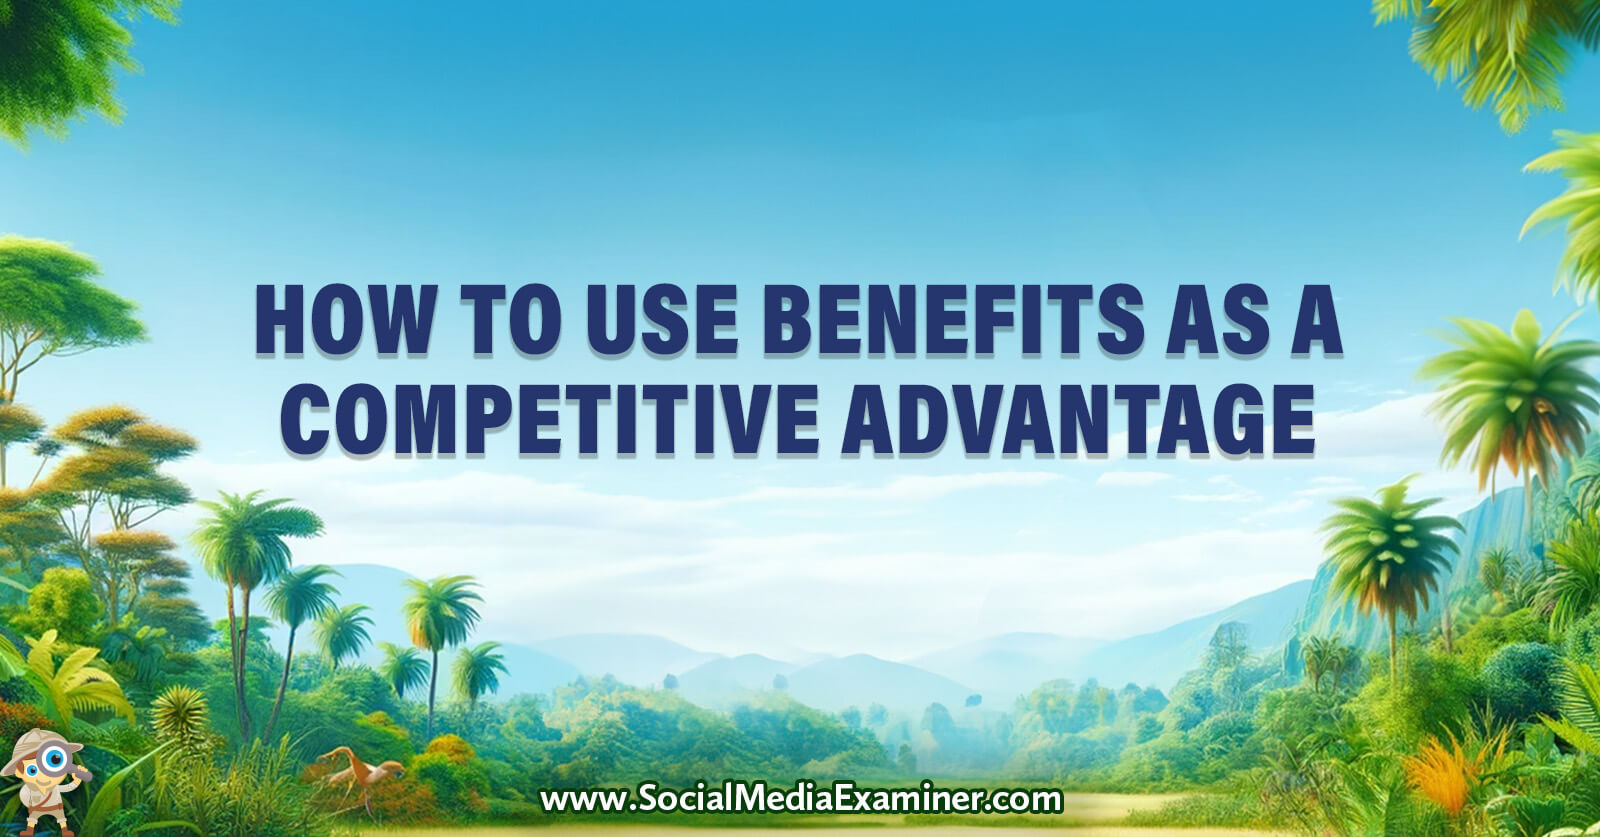 How to Use Benefits as a Competitive Advantage by Social Media Examiner